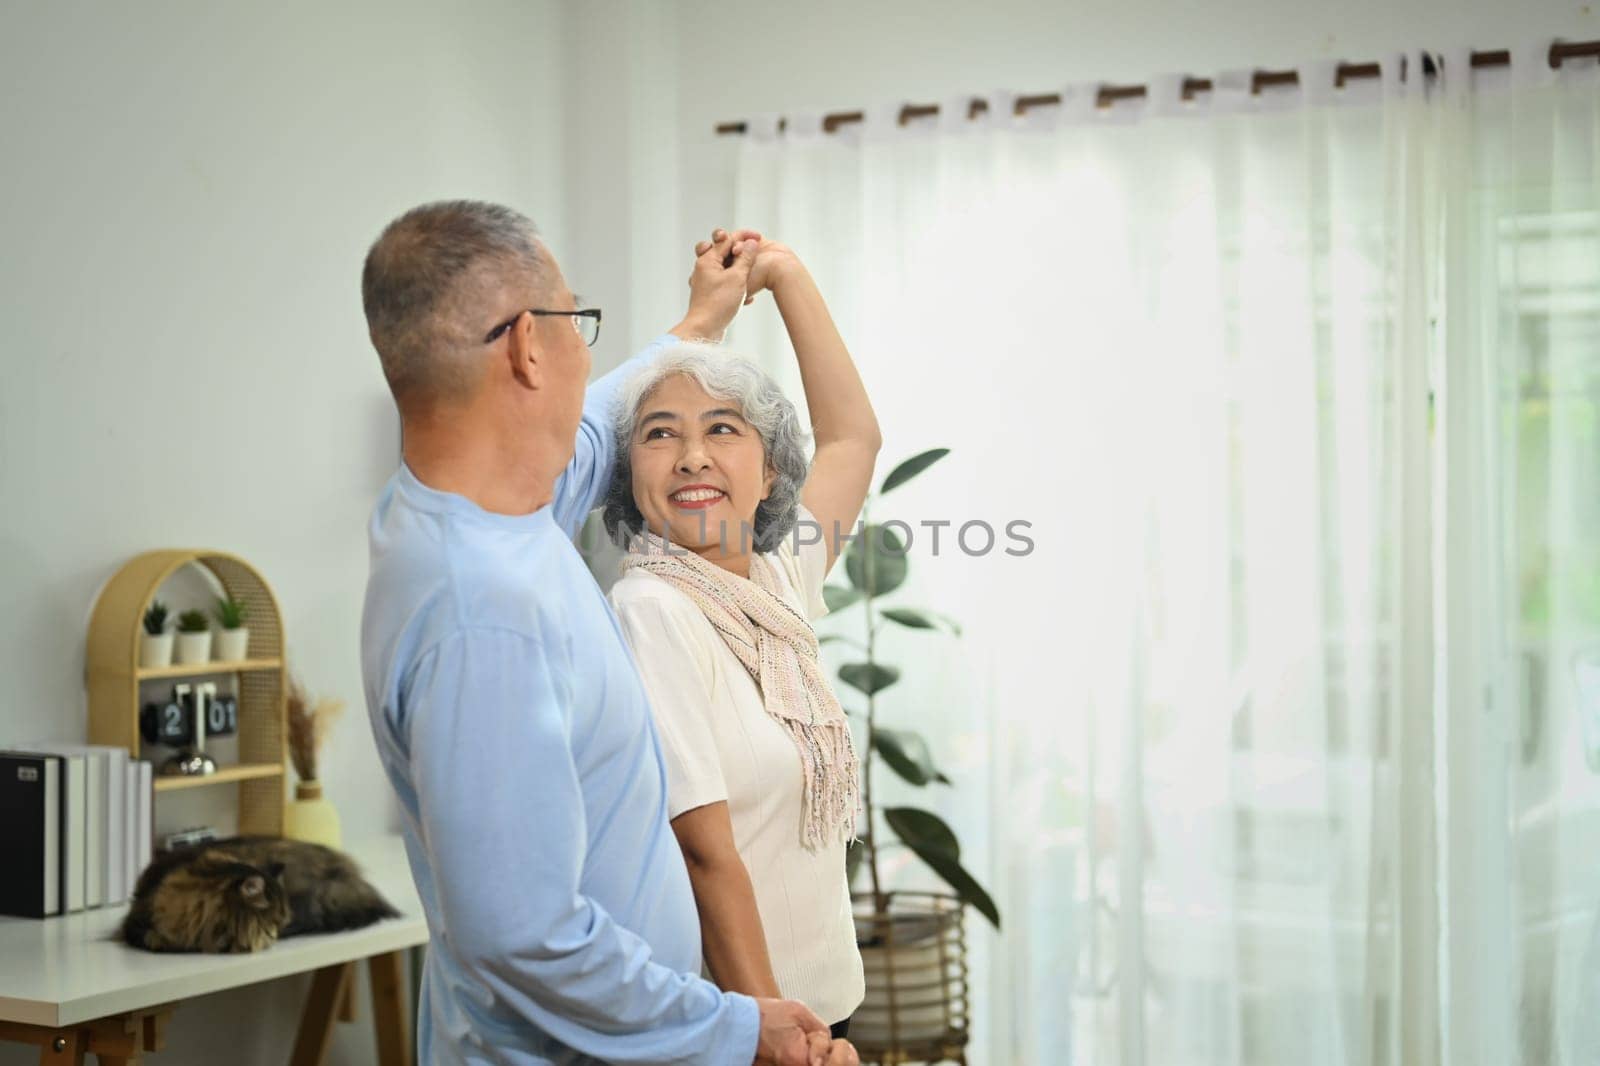 Overjoyed elderly male and female pensioner having fun dancing in living room. Retirement lifestyle concept.